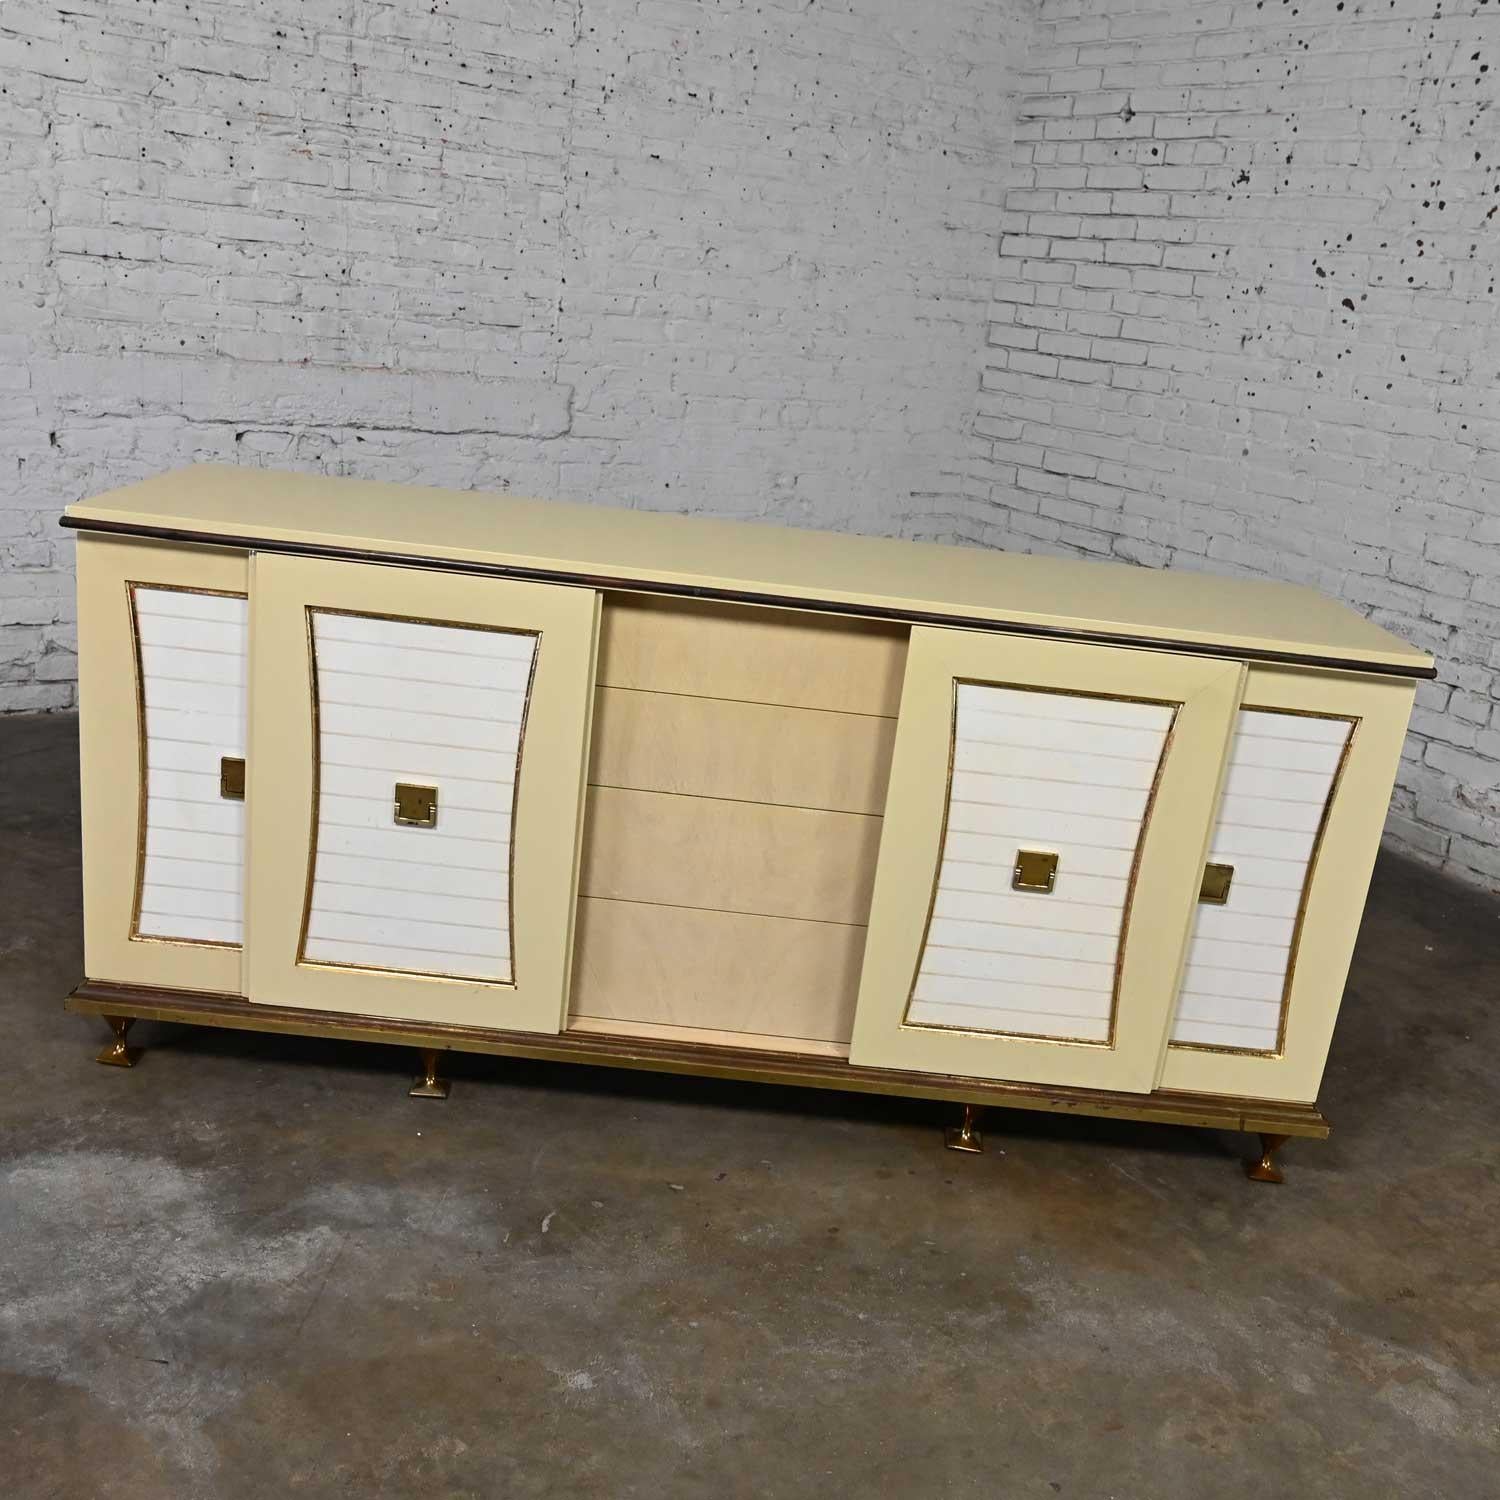 Mid-20th Hollywood Regency Credenza or Dresser by Renzo Rutili for Johnson Furn For Sale 1